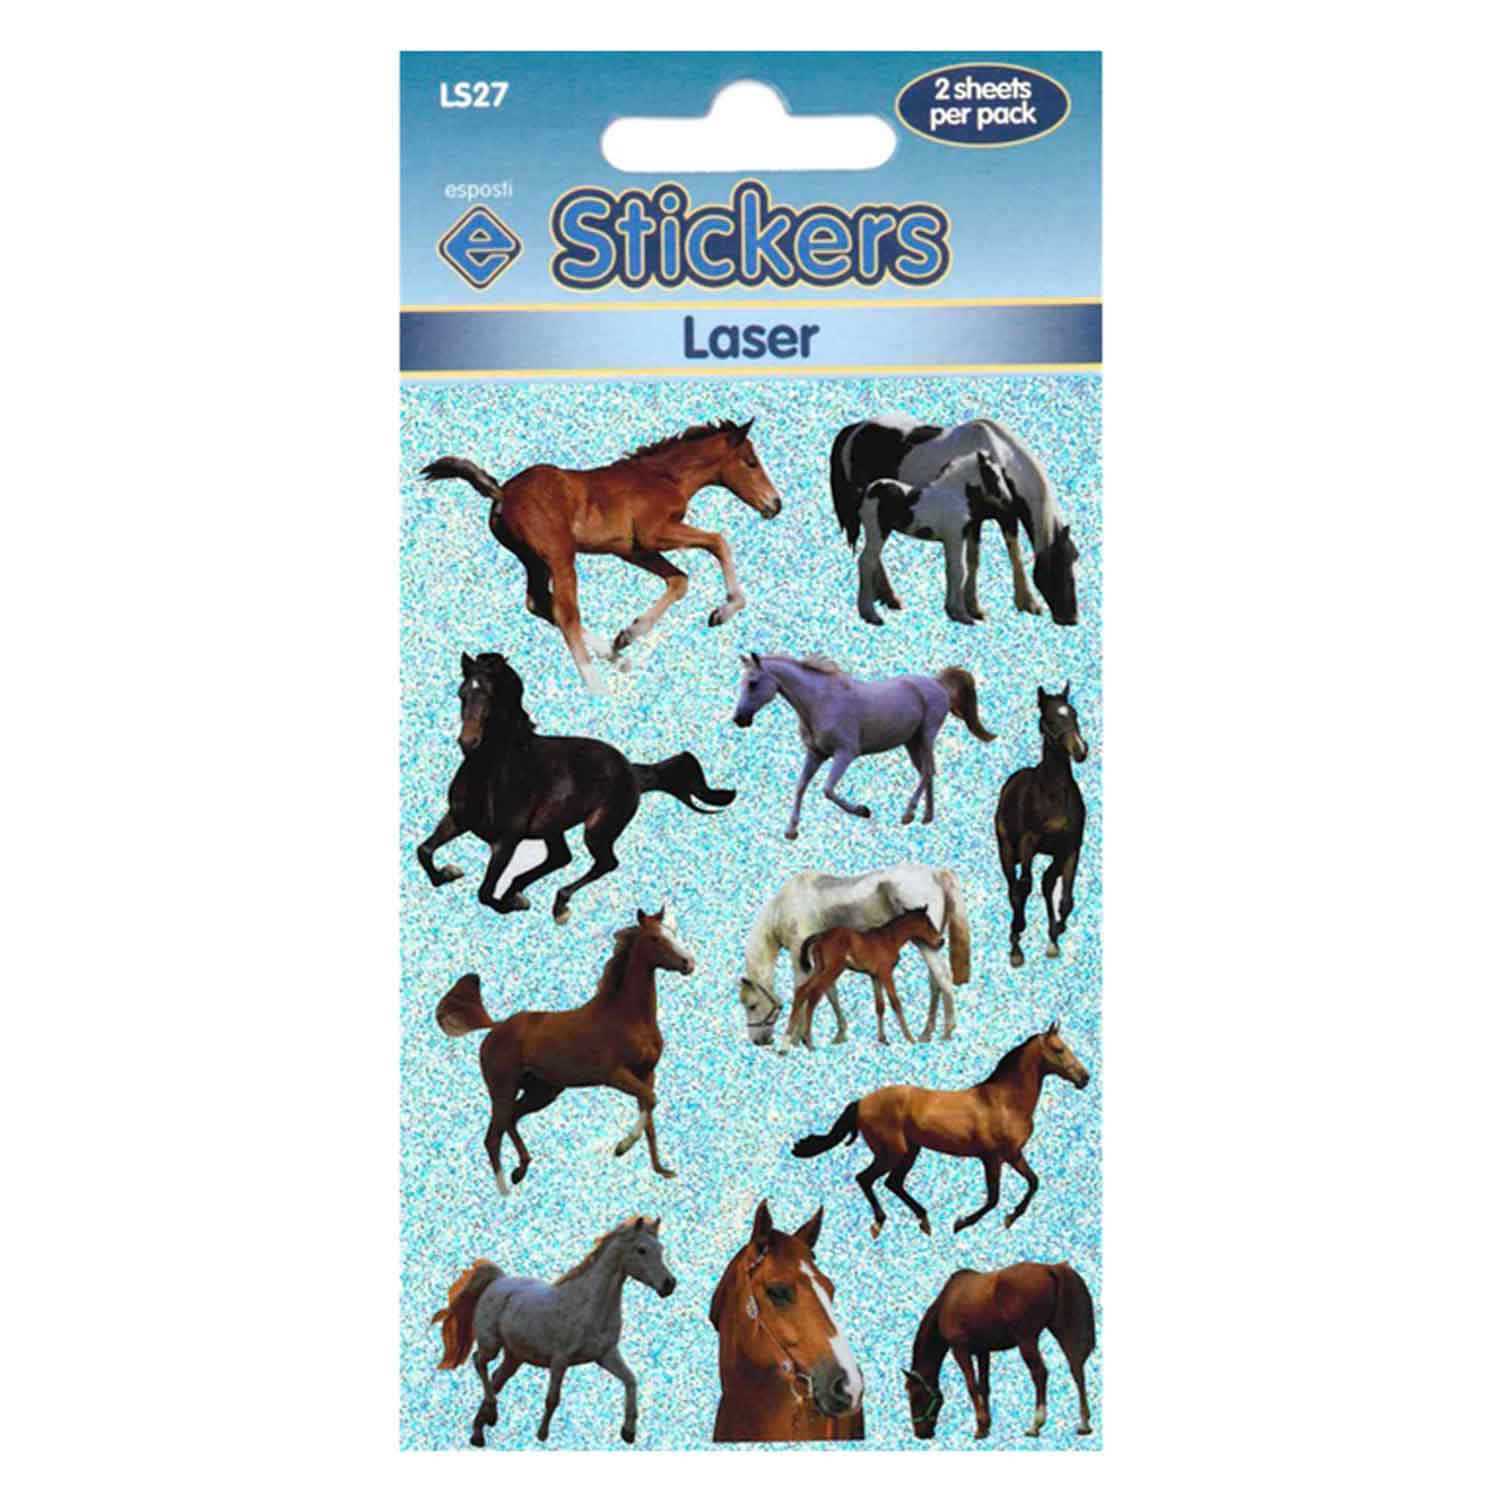 Horses Self Adhesive Laser Novelty Stickers - Pack of 10